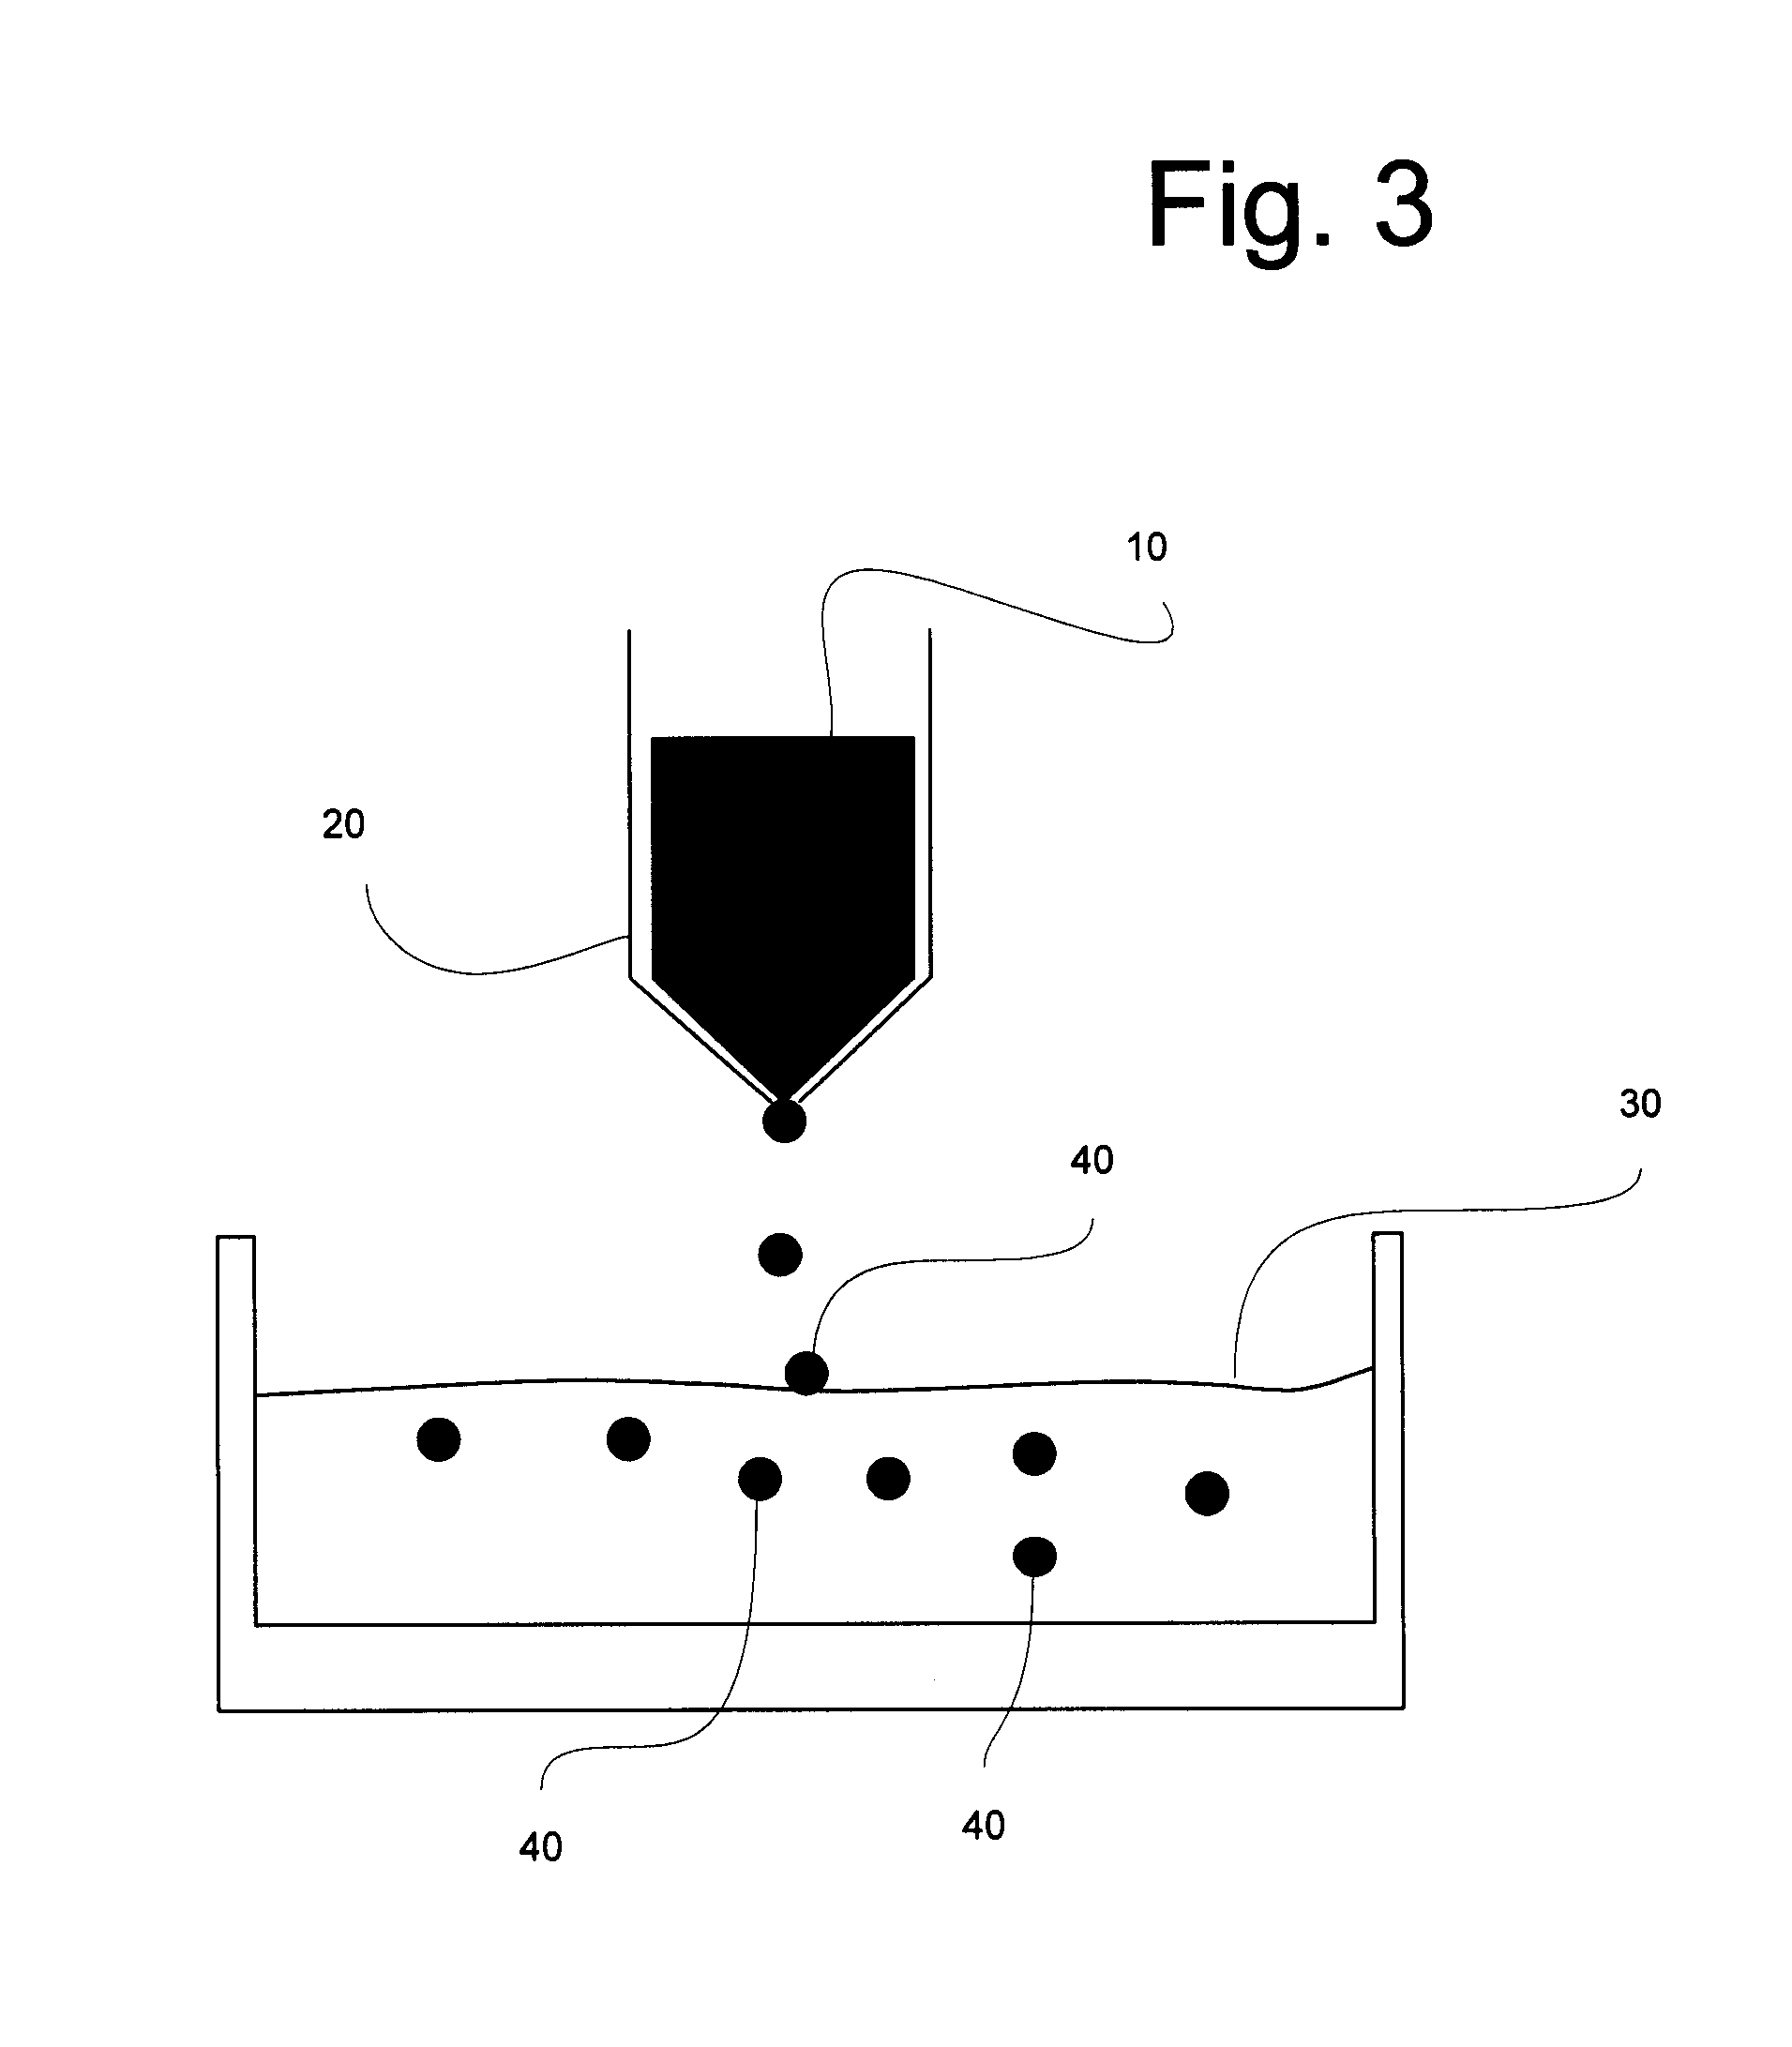 Ferromagnetic cell and tissue culture microcarriers